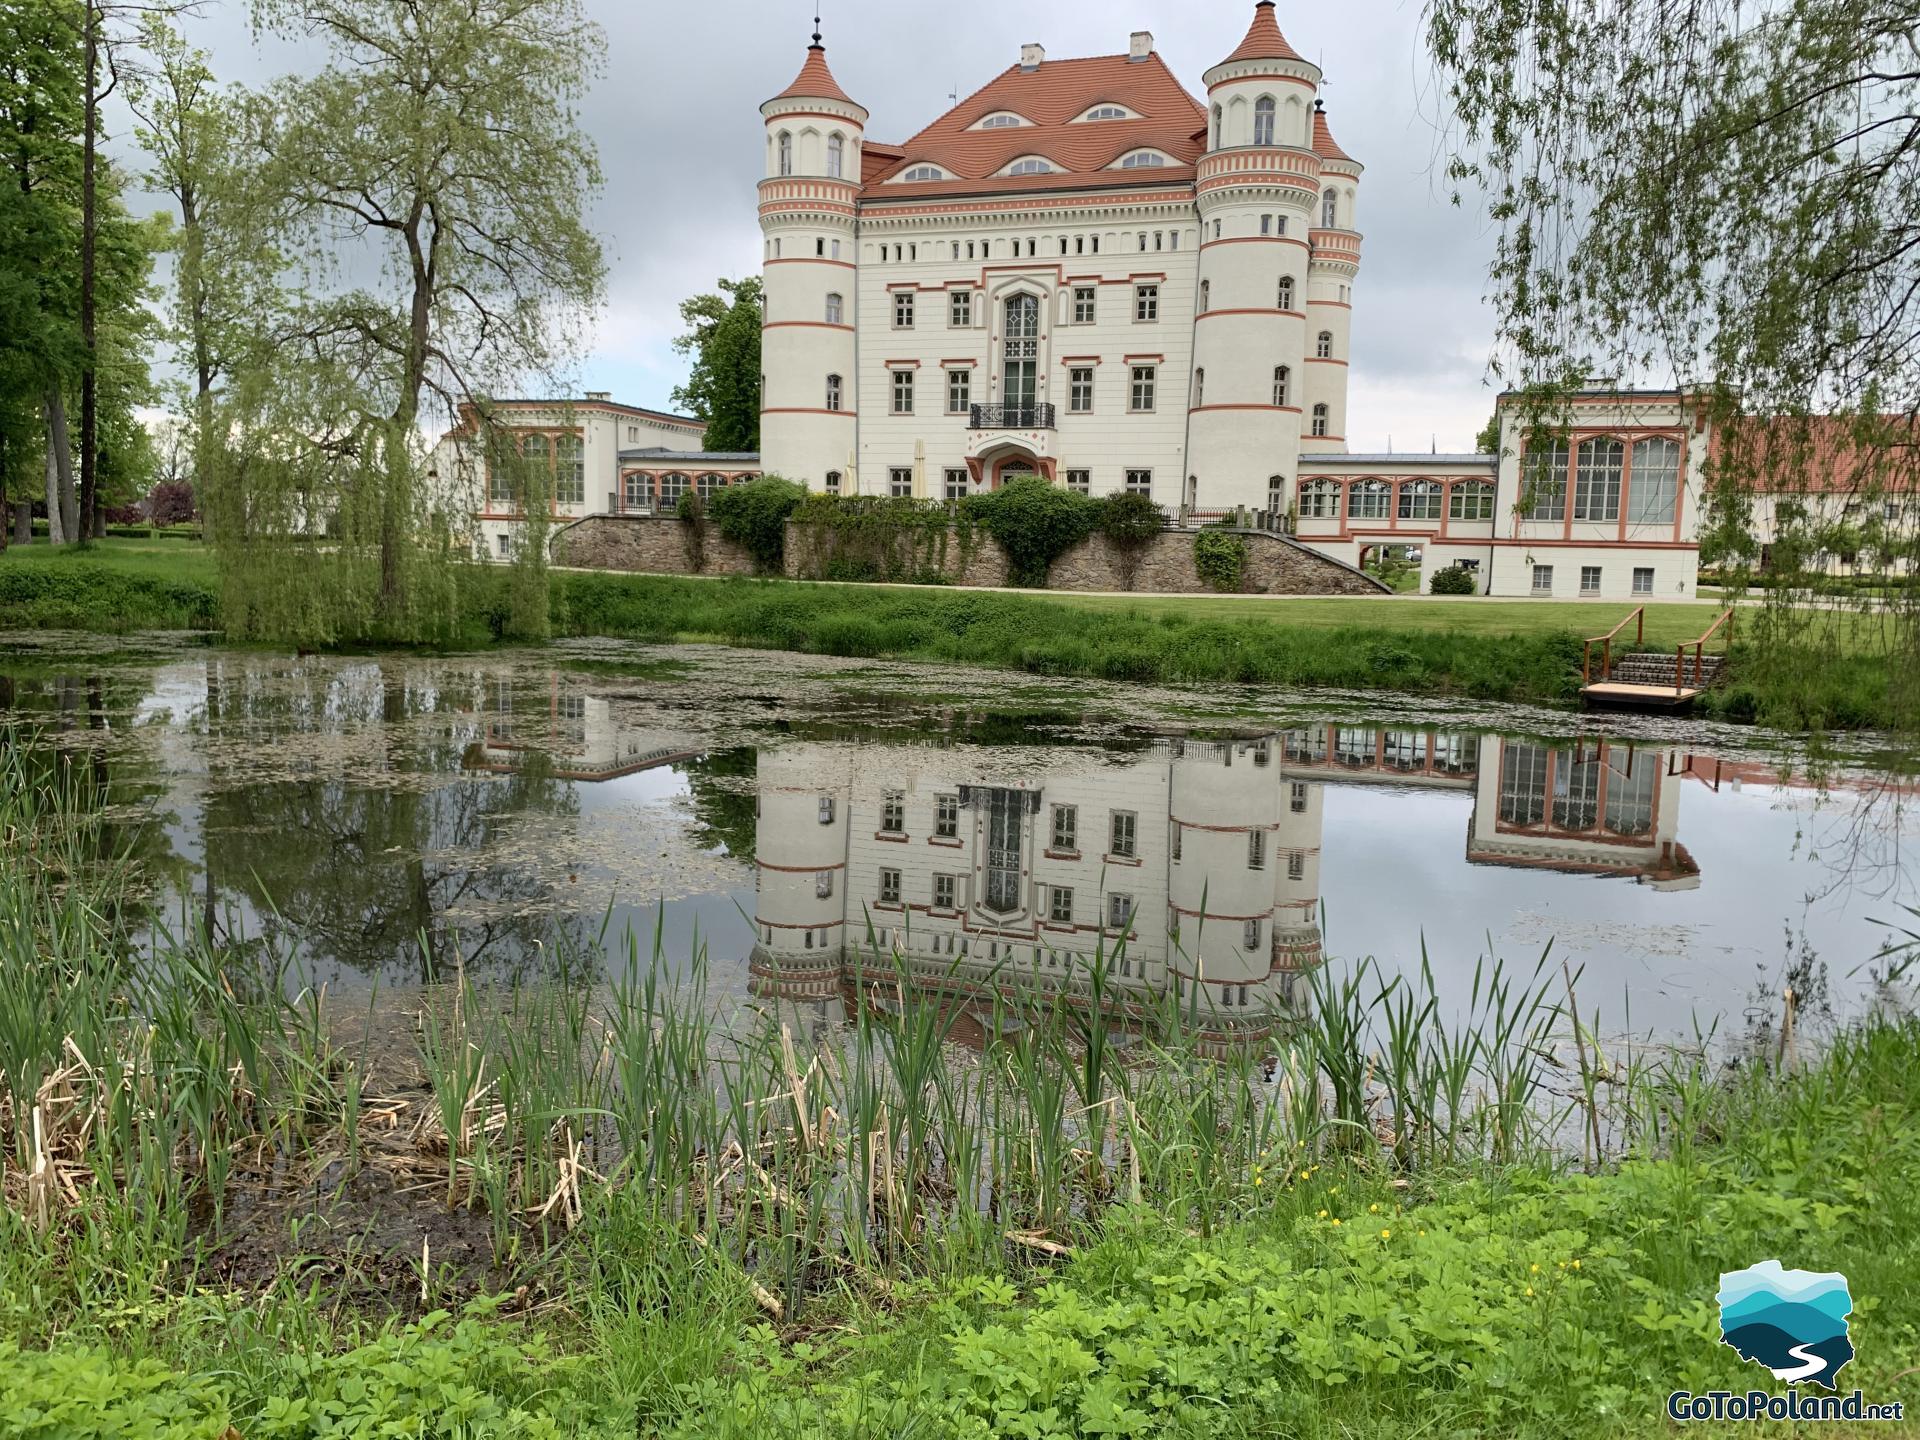 A large pond and a palace whose reflection is on the surface of the pond